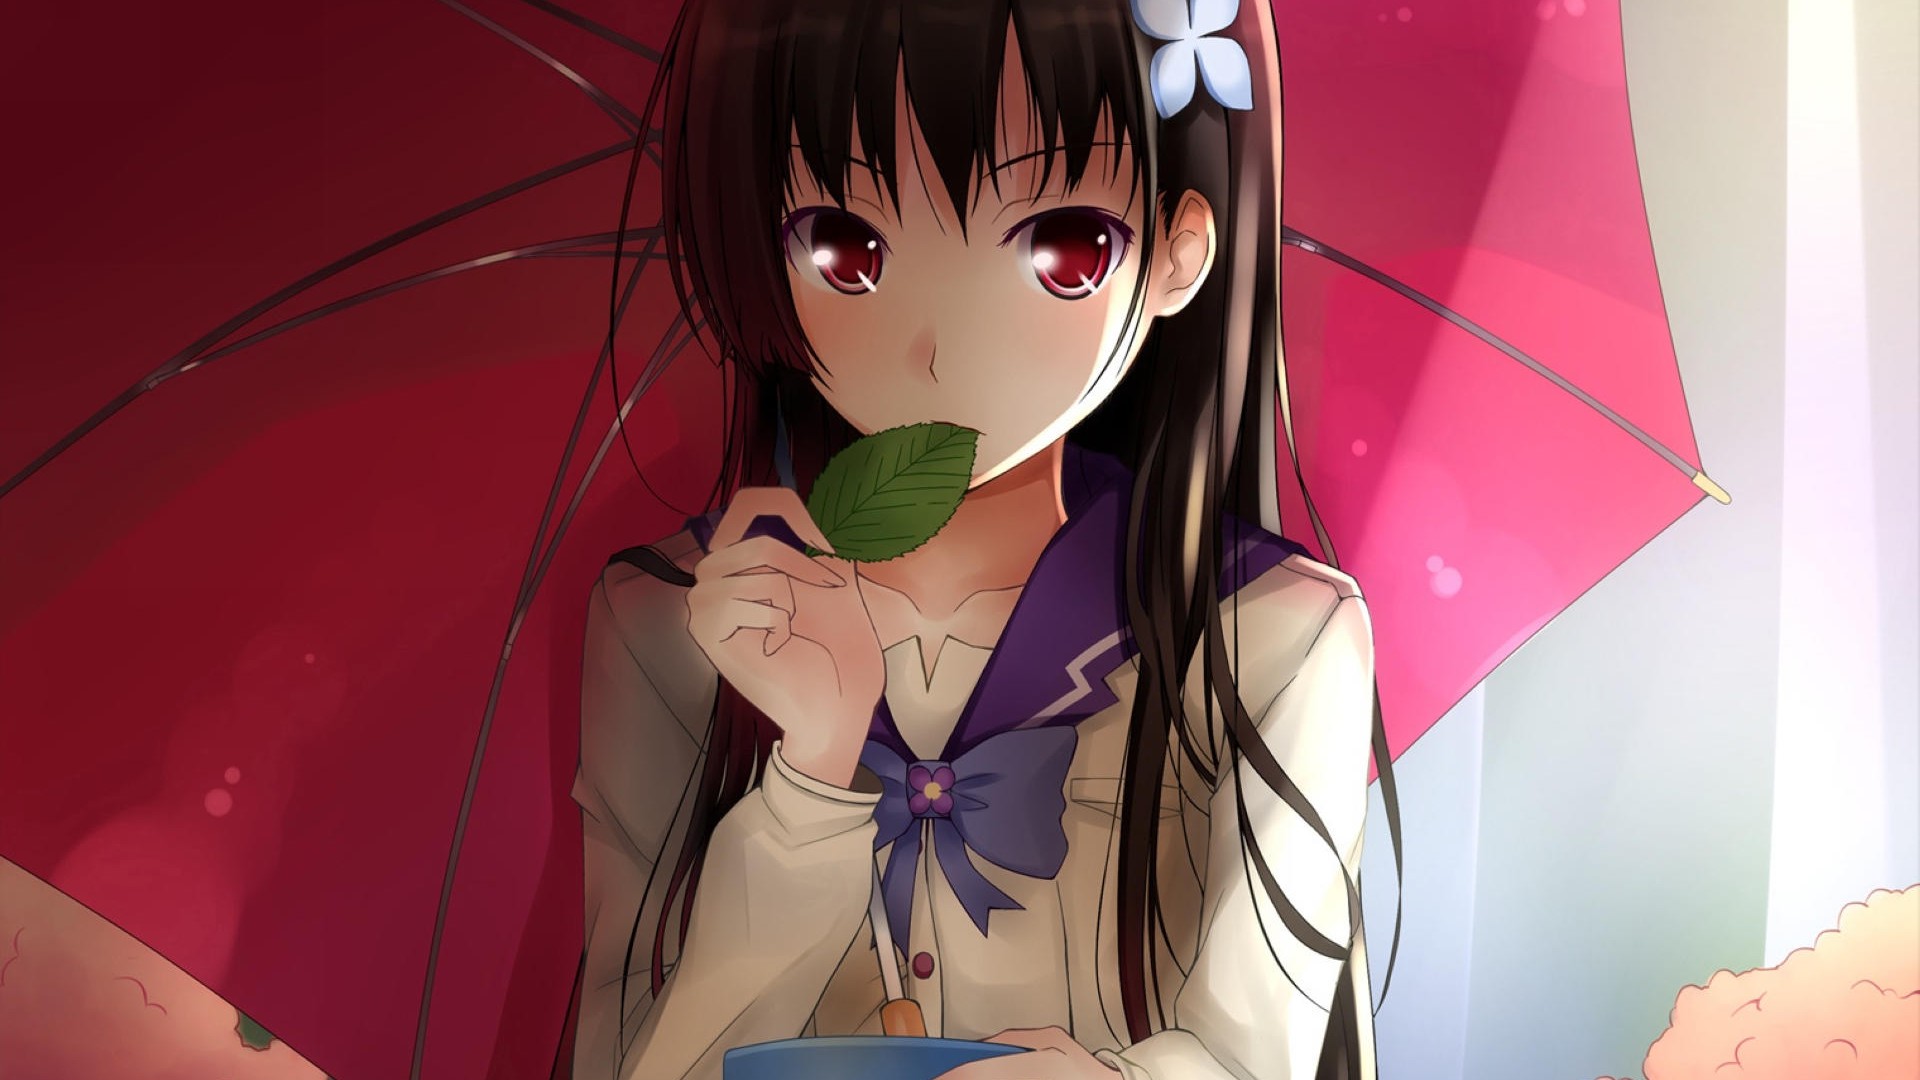 Wallpapers Cute Anime Zombie Girl 223641.6 1920x1080 | #223642 ...